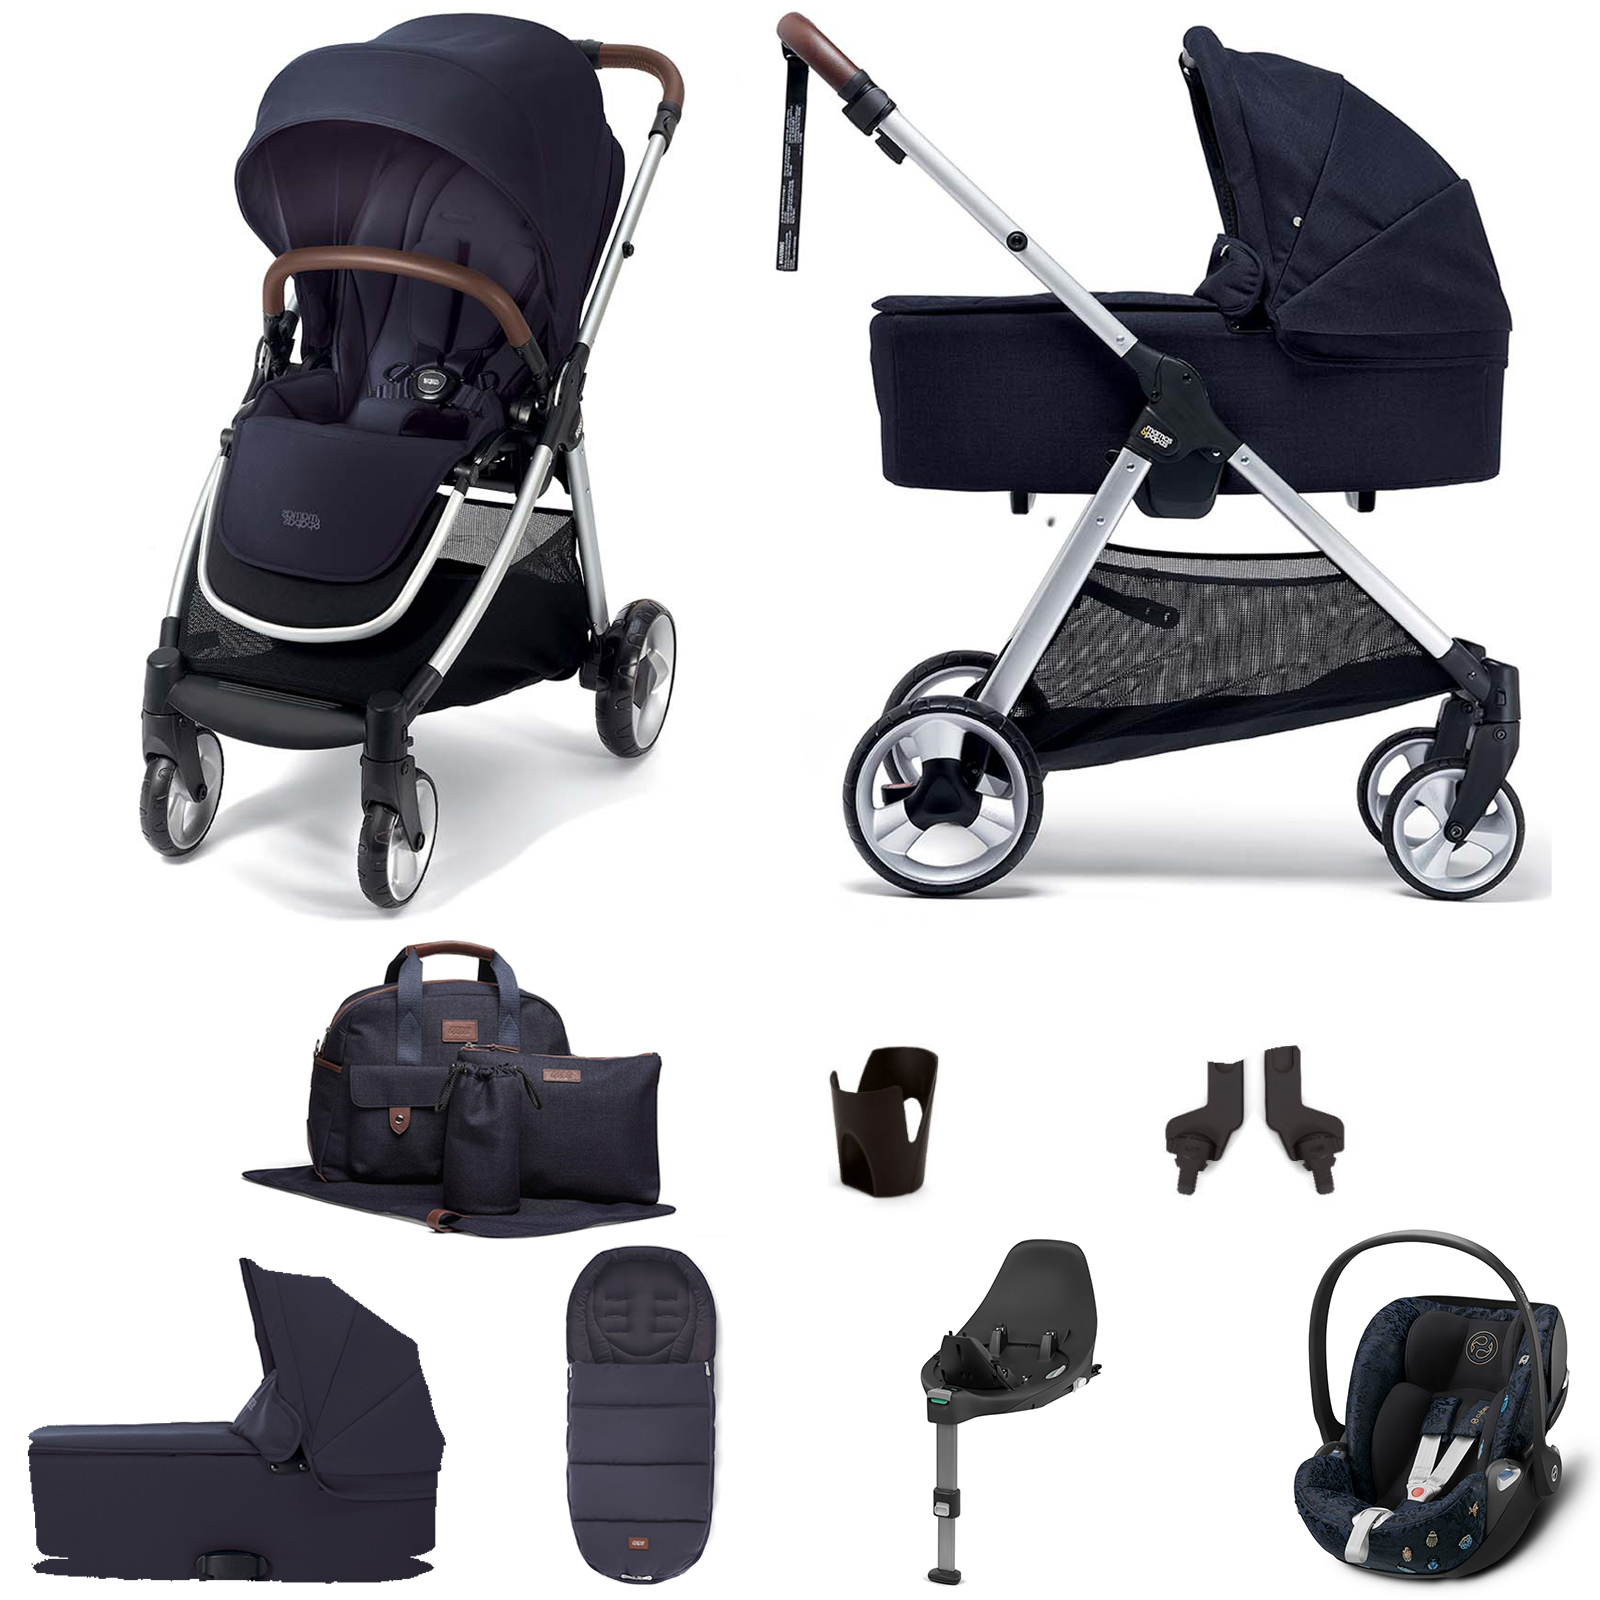 Mamas & Papas Flip XT2 Essentials (Cloud Z Car Seat & ISOFIX Base) Travel System with Carrycot, Footmuff & Changing Bag - Navy